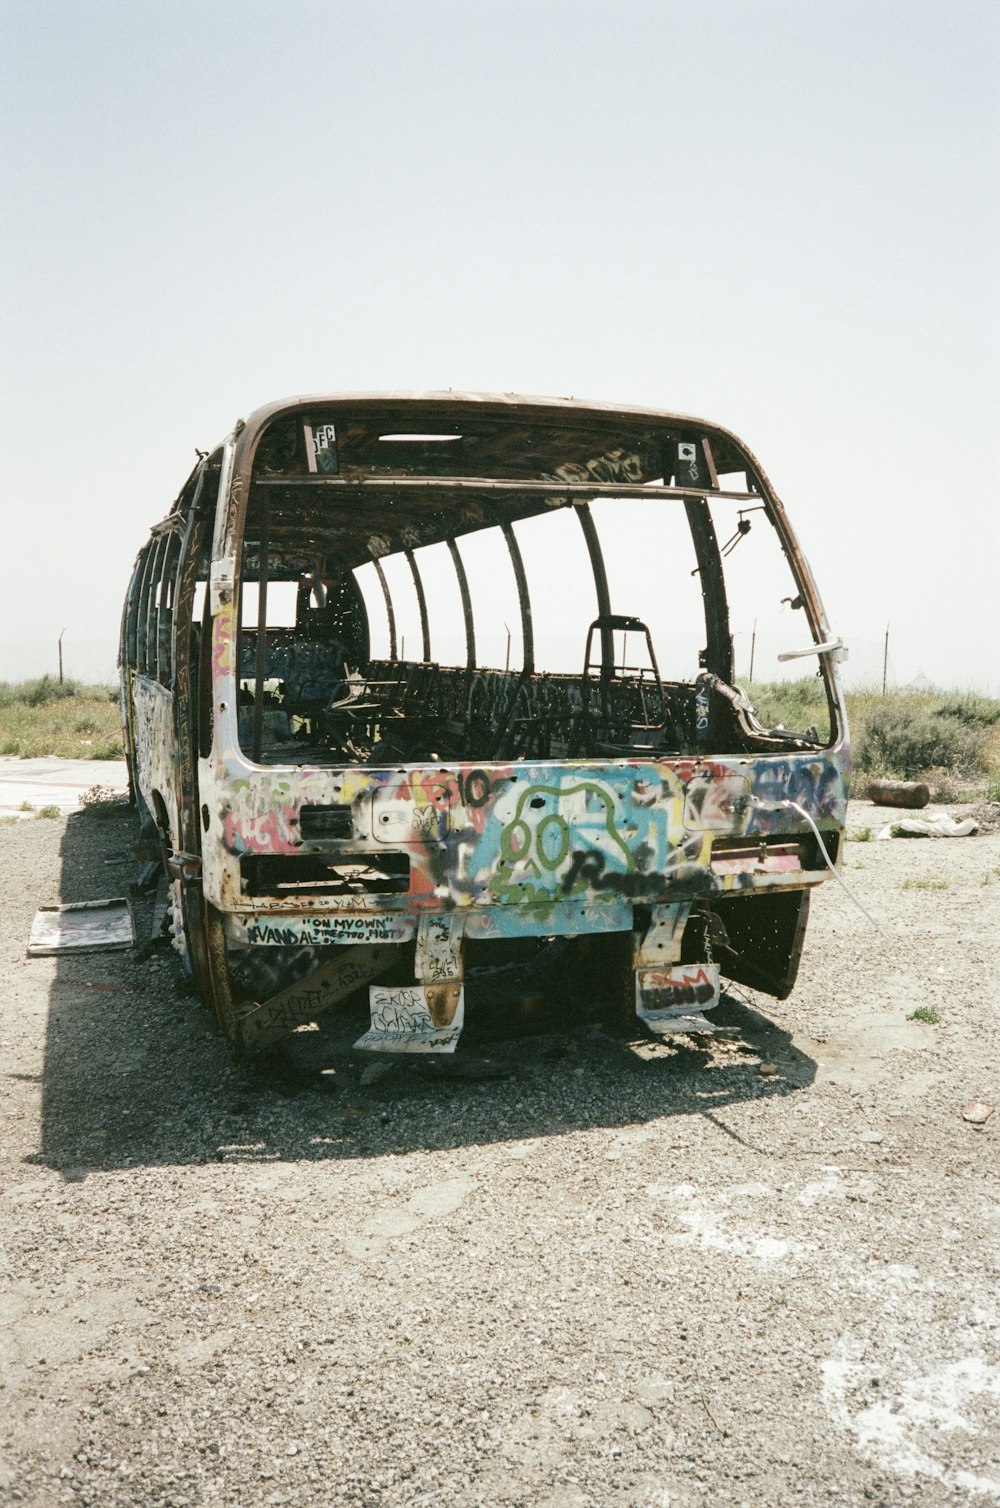 an old bus that has been vandalized with graffiti